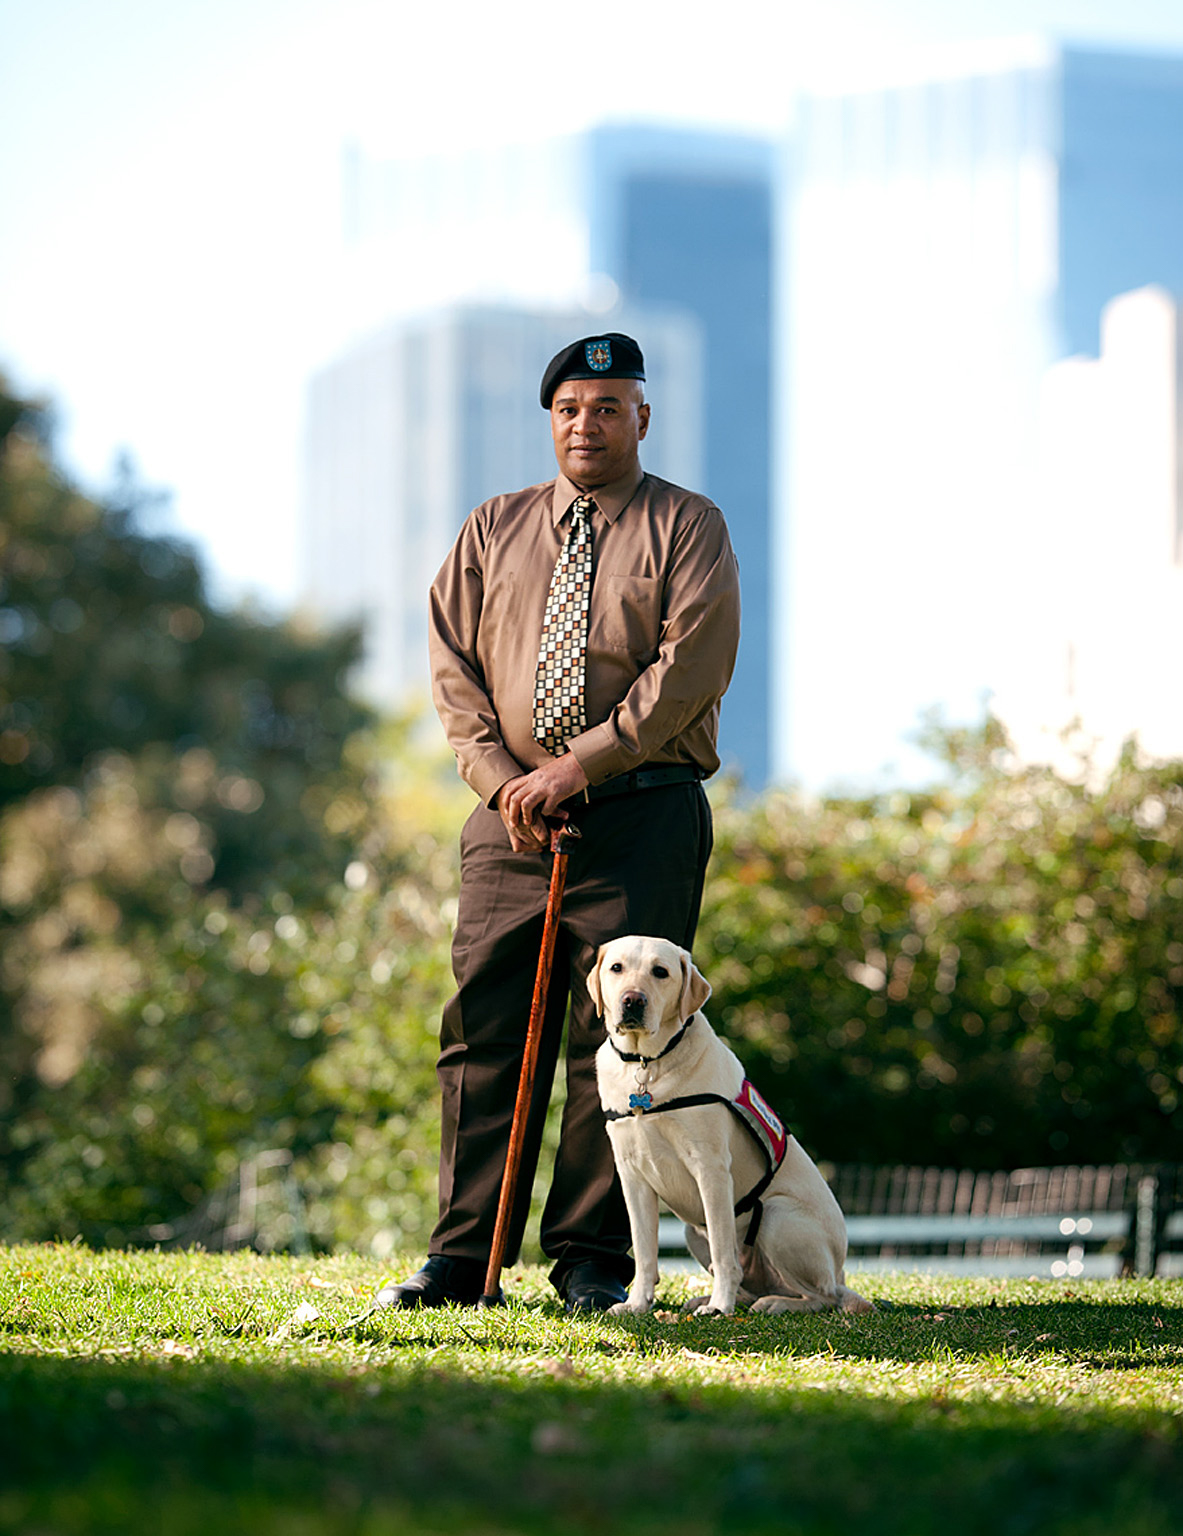 Herbierto Viedro and his Service Dog